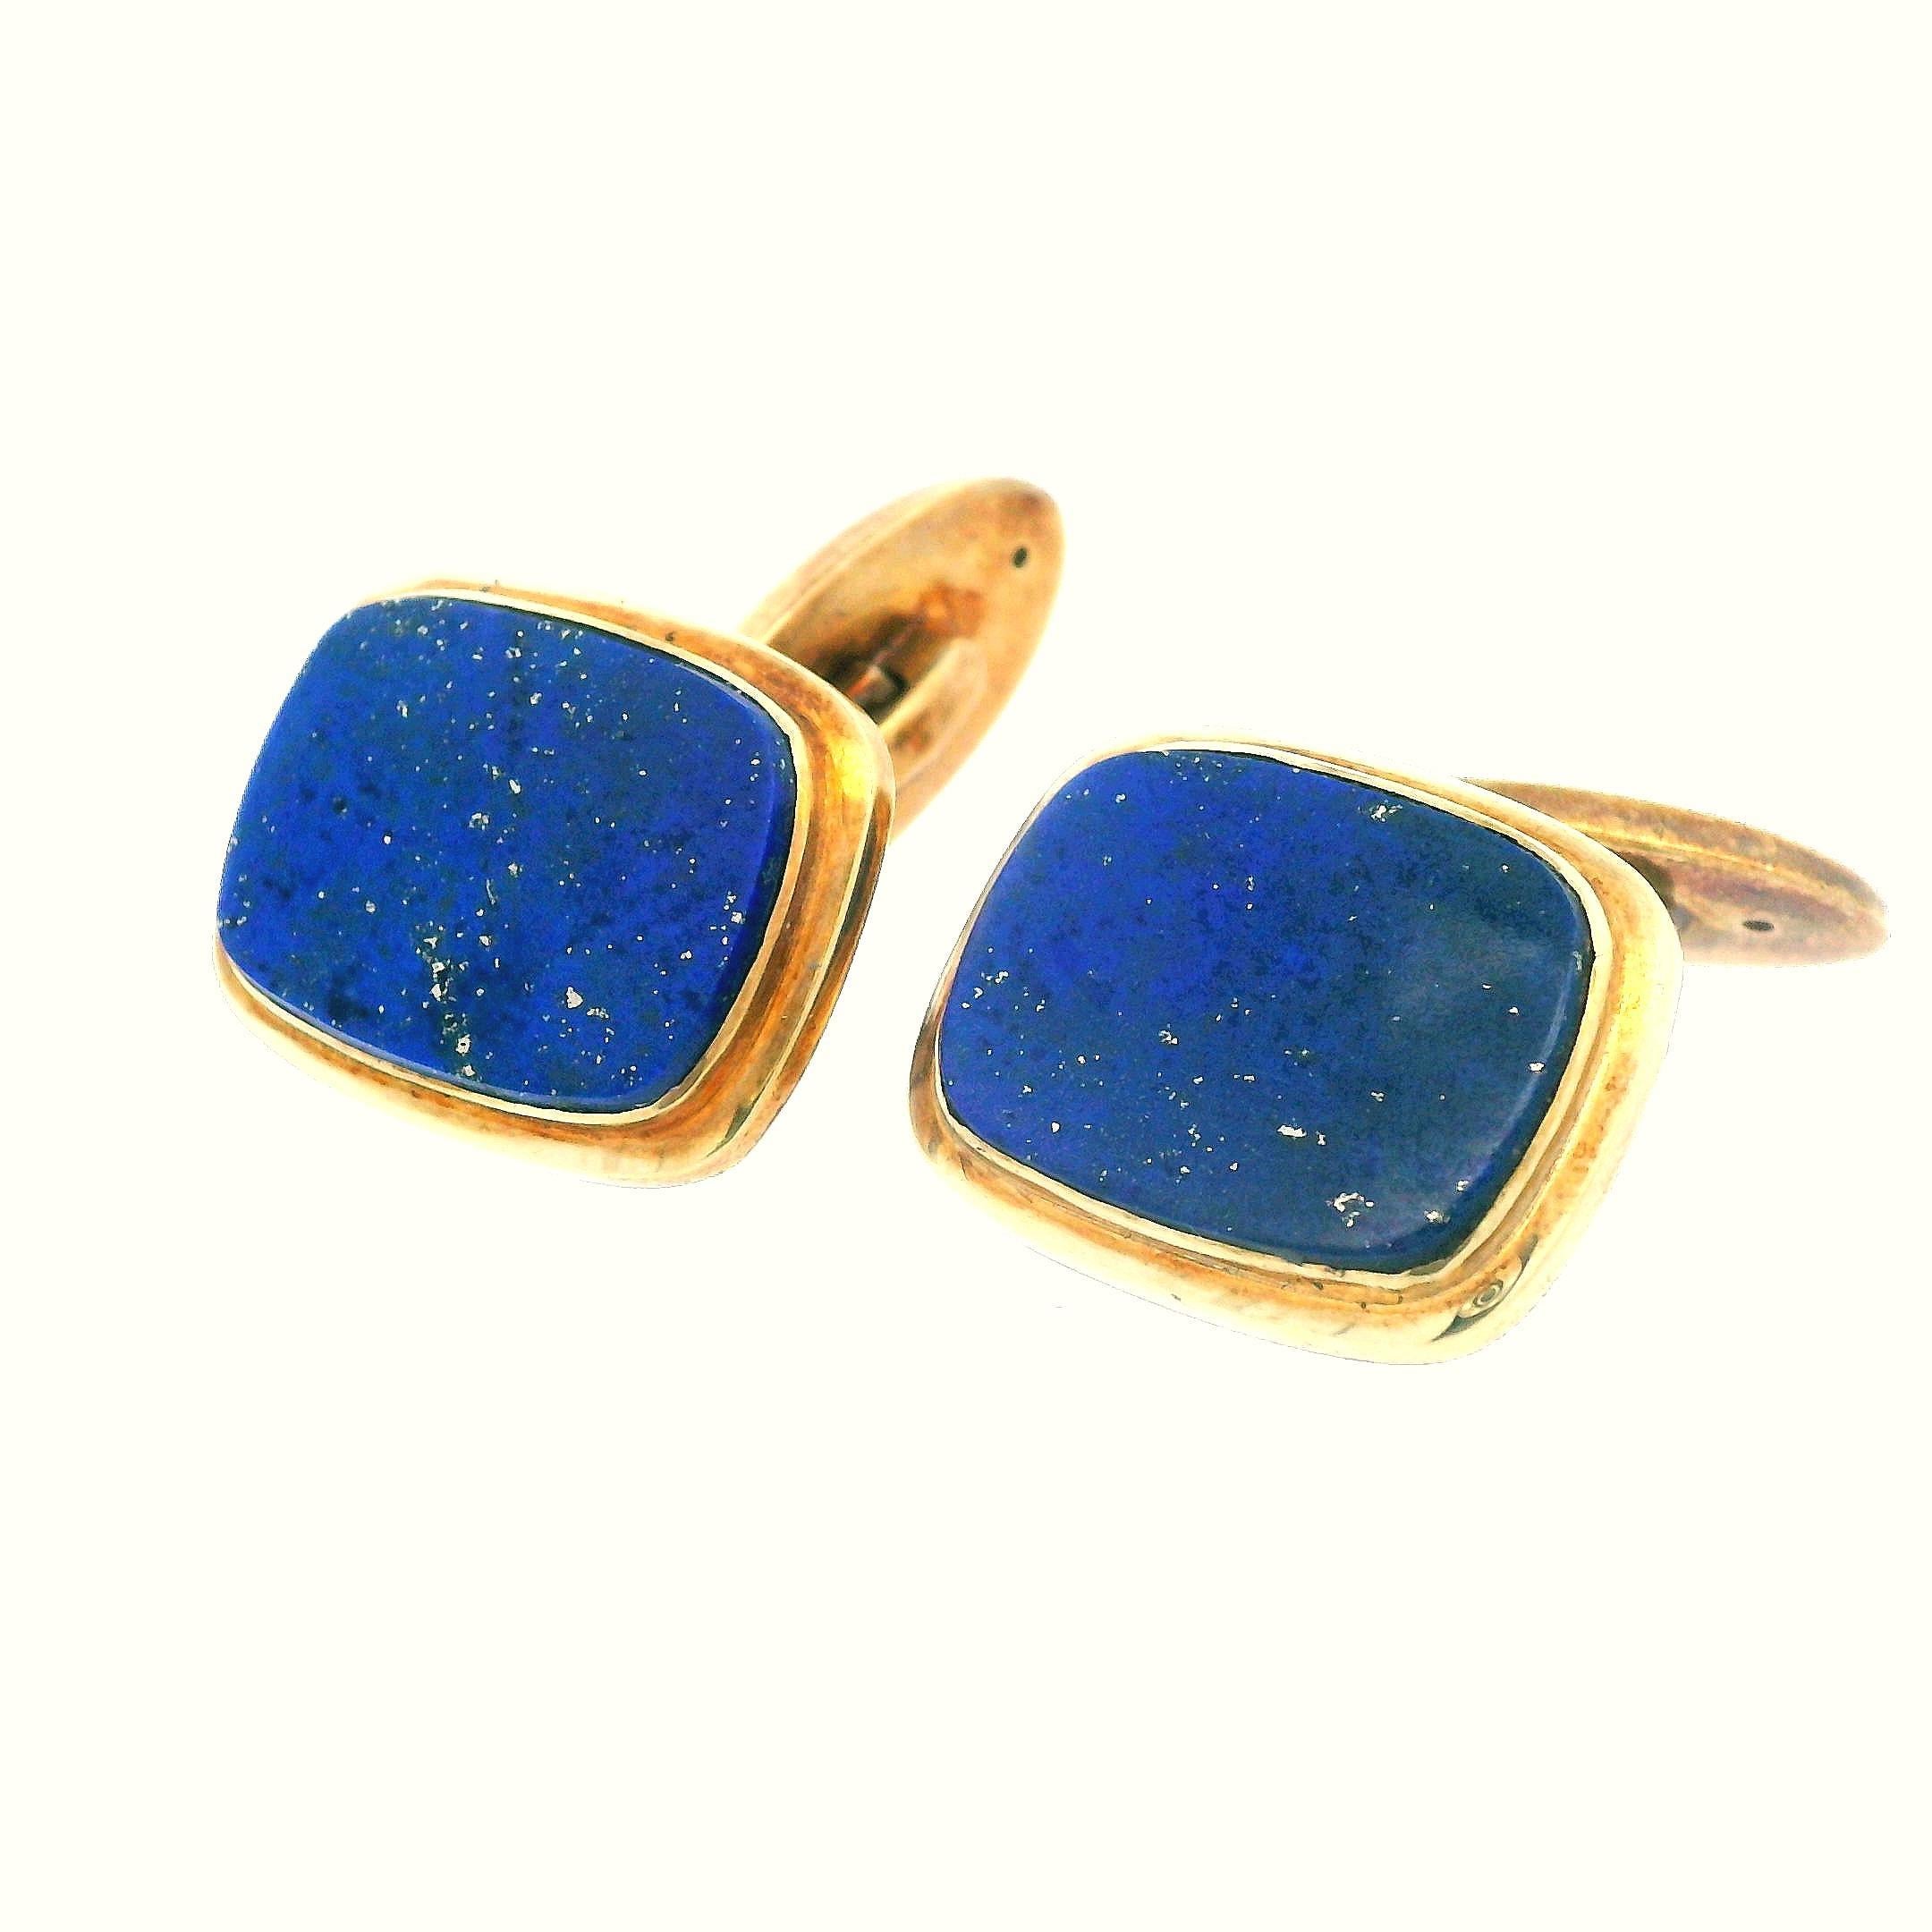 Contemporary 1950s W Germany 14K Yellow Gold Lapis Cufflinks For Sale